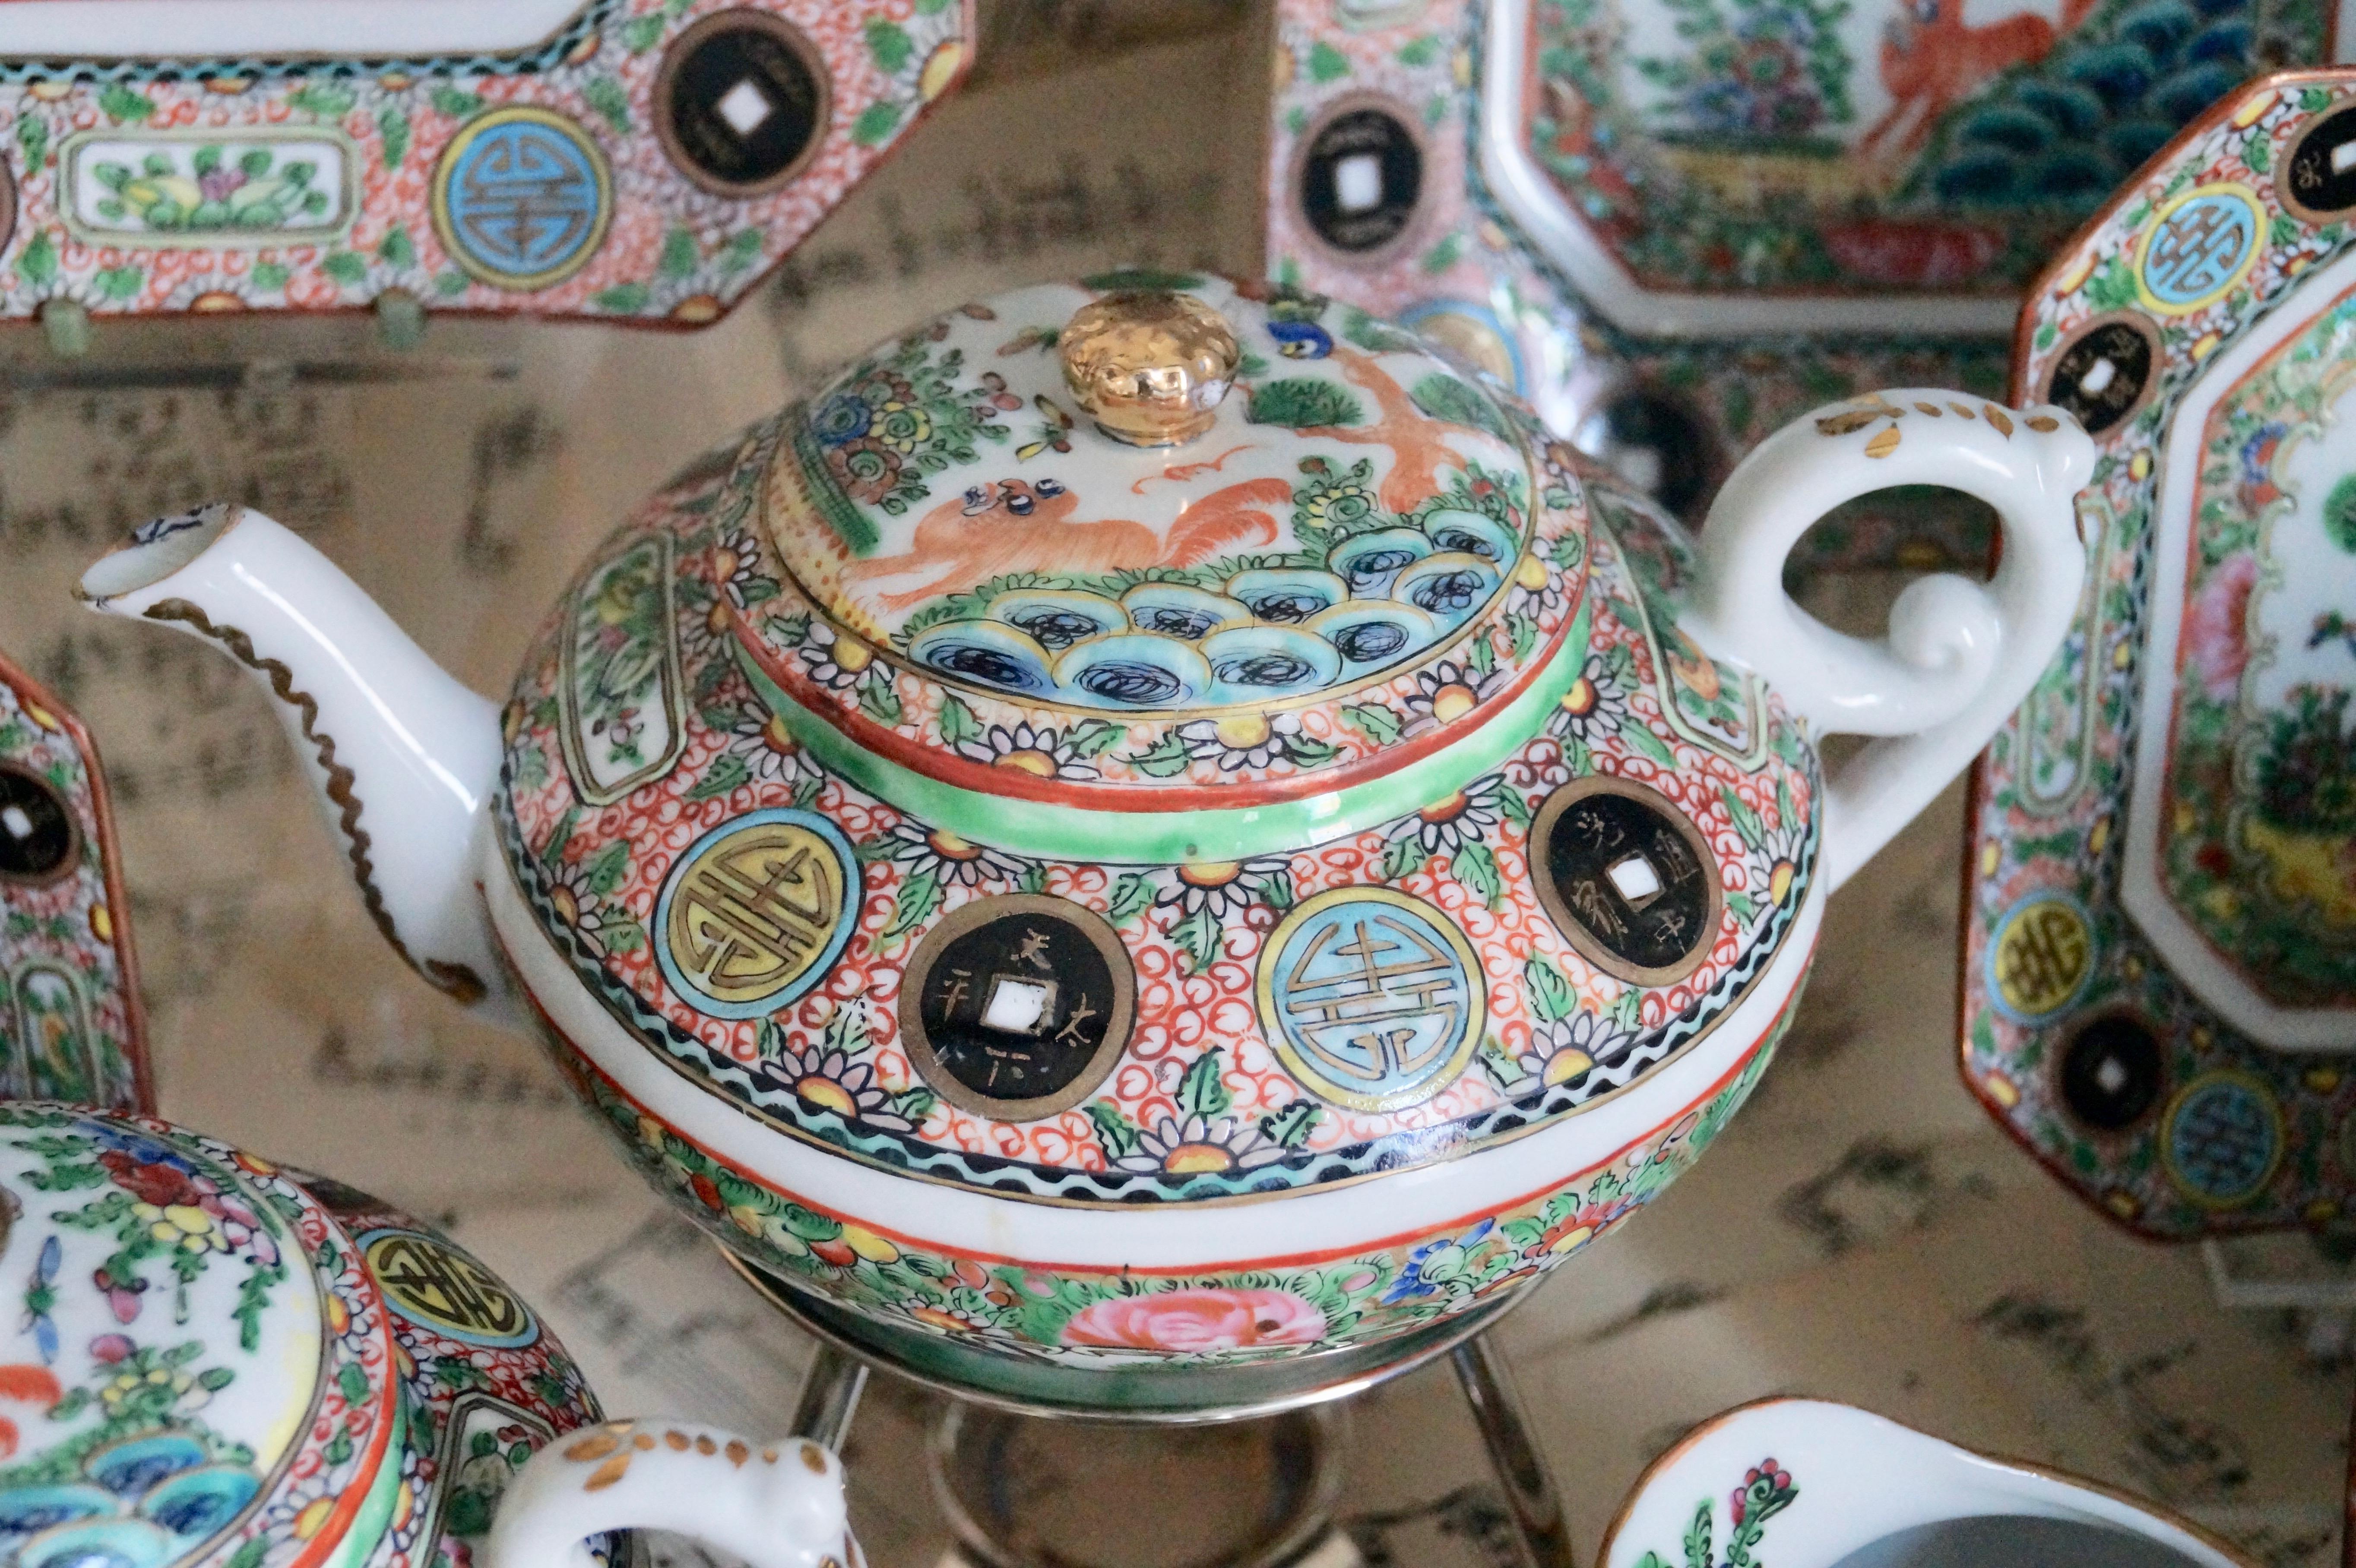 Really beautiful! This antique Chinese tea set for the western export from circa 1880-1900 (Export Porcelain) with Famille Rose decoration of a scene with a Foo dog playing with a bird in the garden with Rocks, Trees, butterflies and plants.

Take